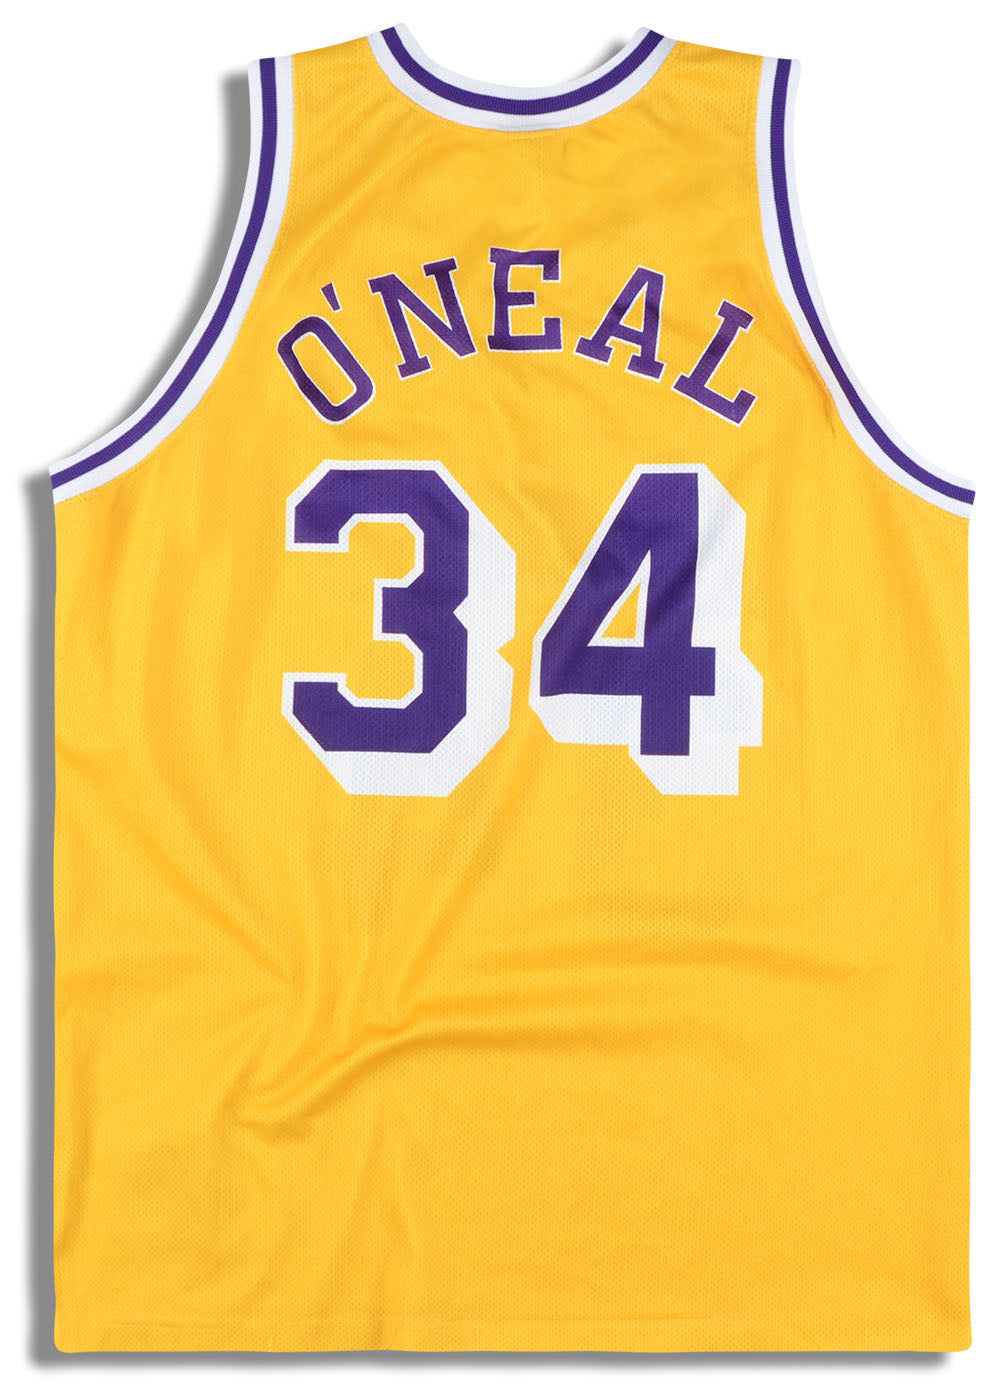 Vintage Champion Lakers 34 Shaquille O'neal Jersey -  Hong Kong